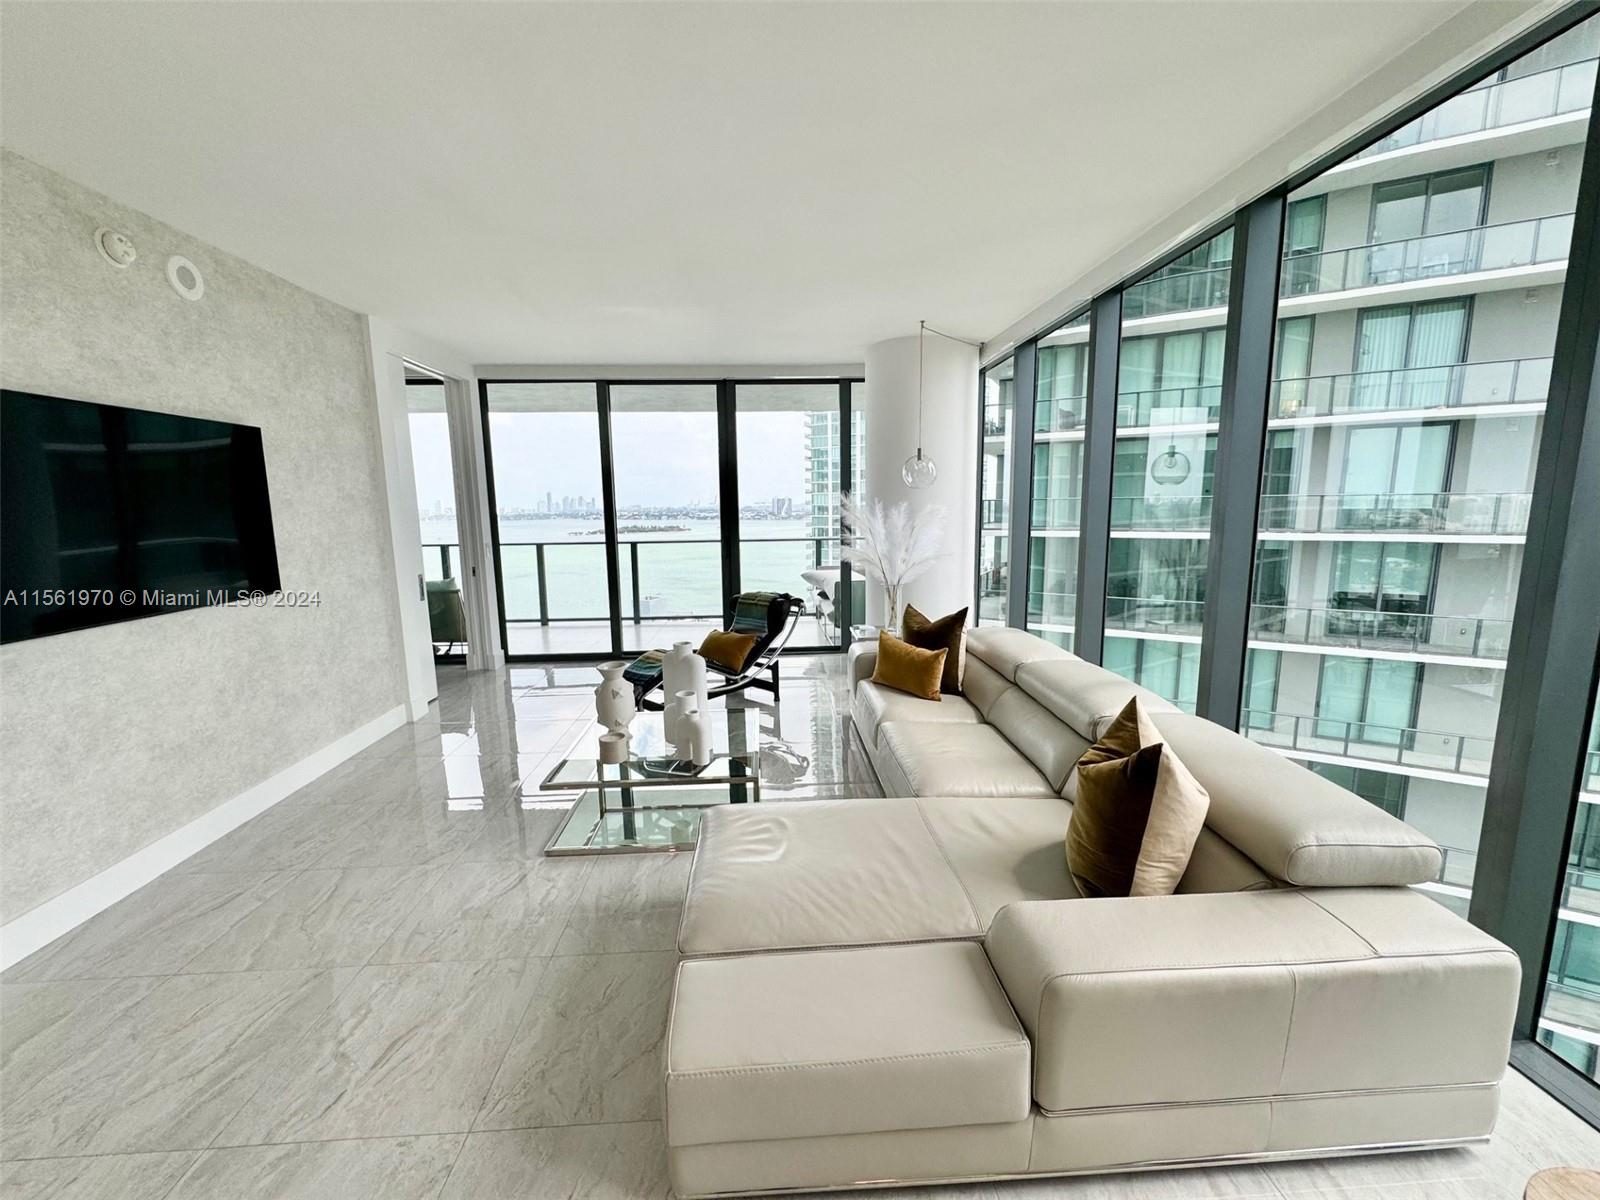 Stunning modern corner unit in the luxurious Paraiso Bay. With 1,646 SF, and 300 SF of terraces, this 3 bed/ 3.5 baths plus Den and private foyer apartment, is full of light. The East facing terrace overlooking the endless blue waters of Biscayne Bay and the Beach, give you the perfect sunrise views, while the West facing terrace, allows you to enjoy the most incredible Miami Sunsets! The unit features high end upgrades with spot lighting, customized closets throughout, motorized shades, additional built-in pantry.  Fully Furnished and available for rent until Mid Nov 2024. Enjoy resort style amenities: Signature restaurant / Amara Beach Club by the Bay; Olympic size circular zero entry pool; tennis courts; putting green; bowling alley; screening room; fitness center; spa;